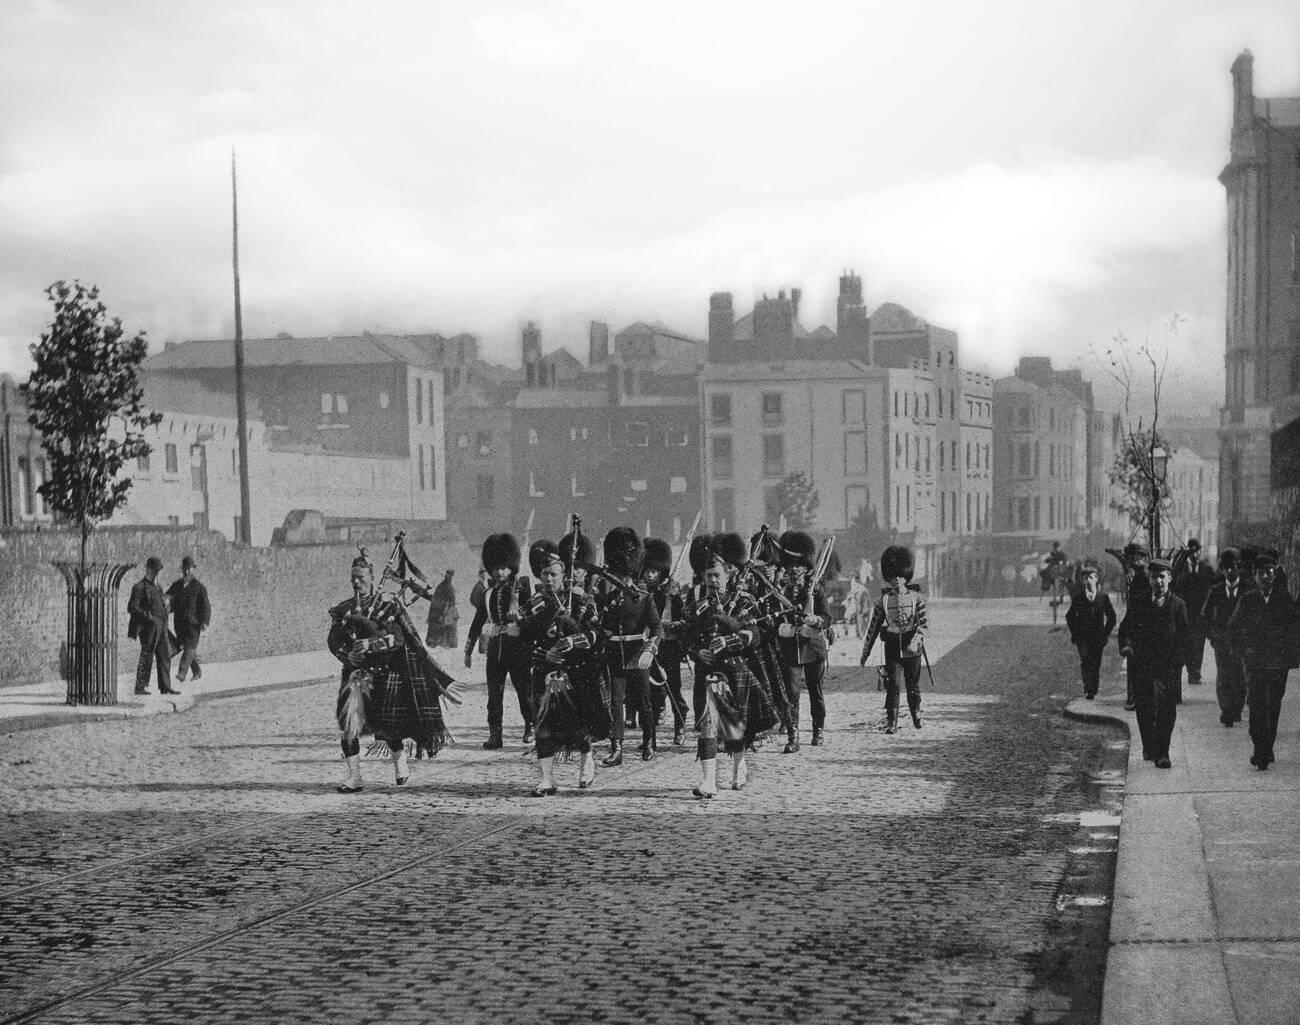 The Scots Guards of the British Army marching through Dublin.